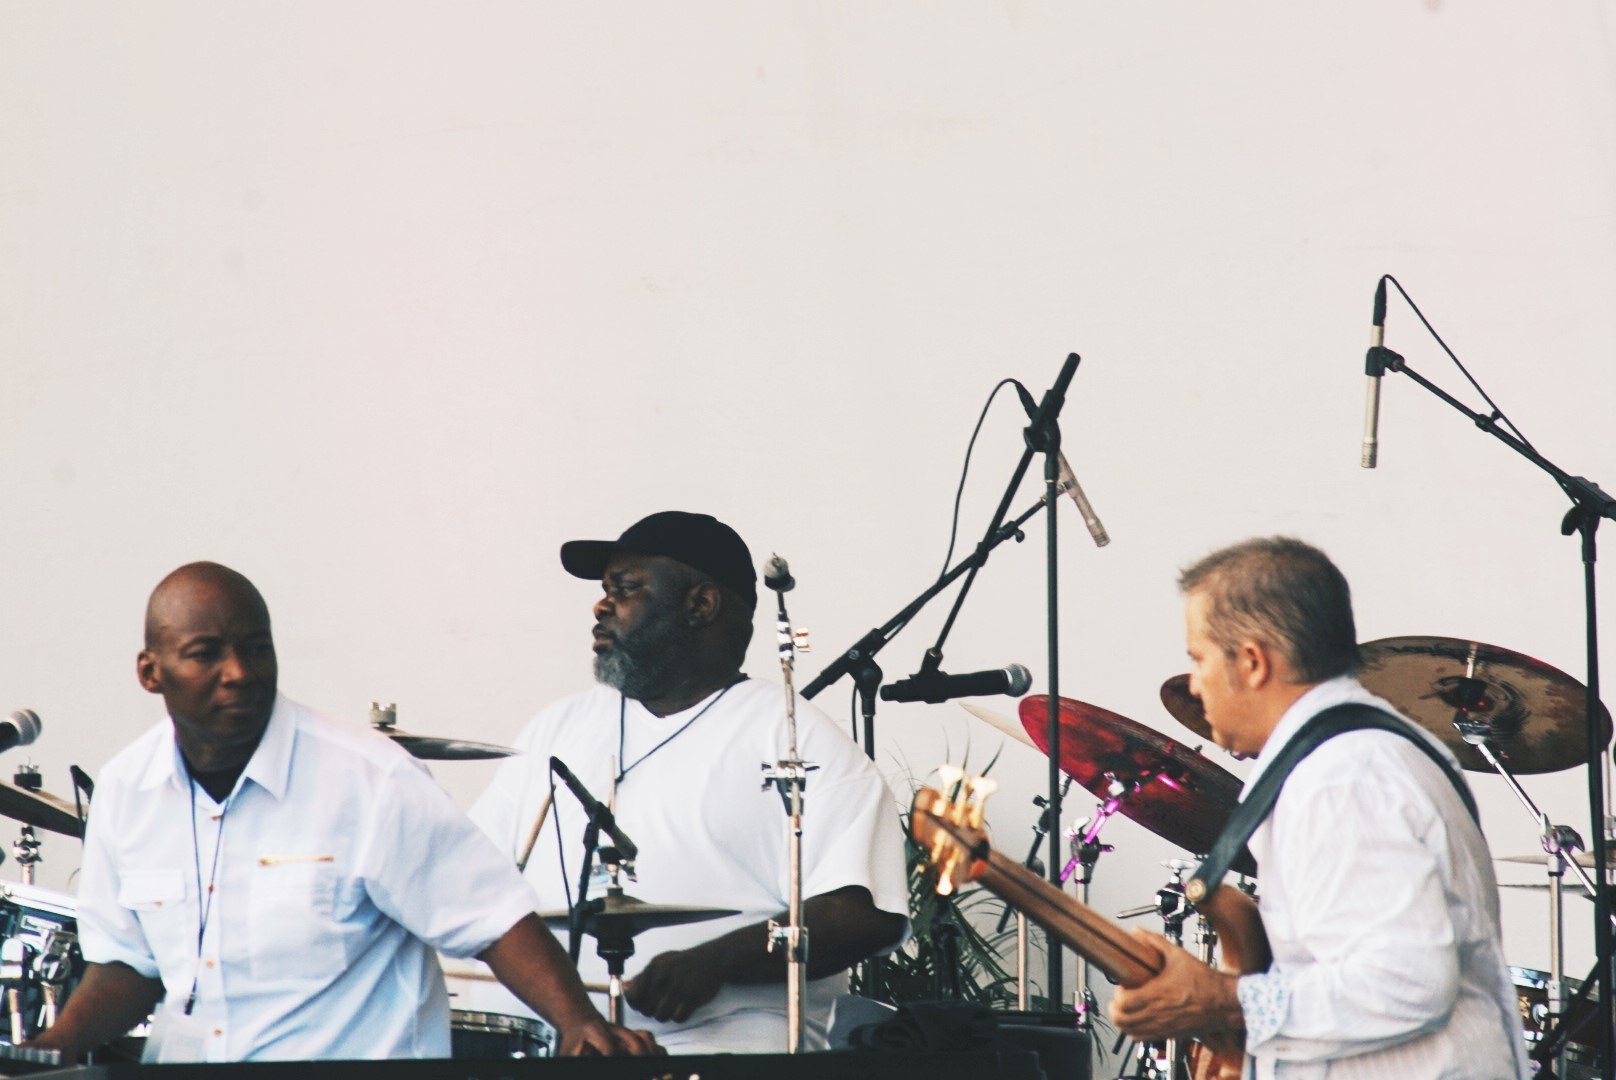 Carlos Peterson, James Davis and Jesse Reyes of The Groov jam with the audience